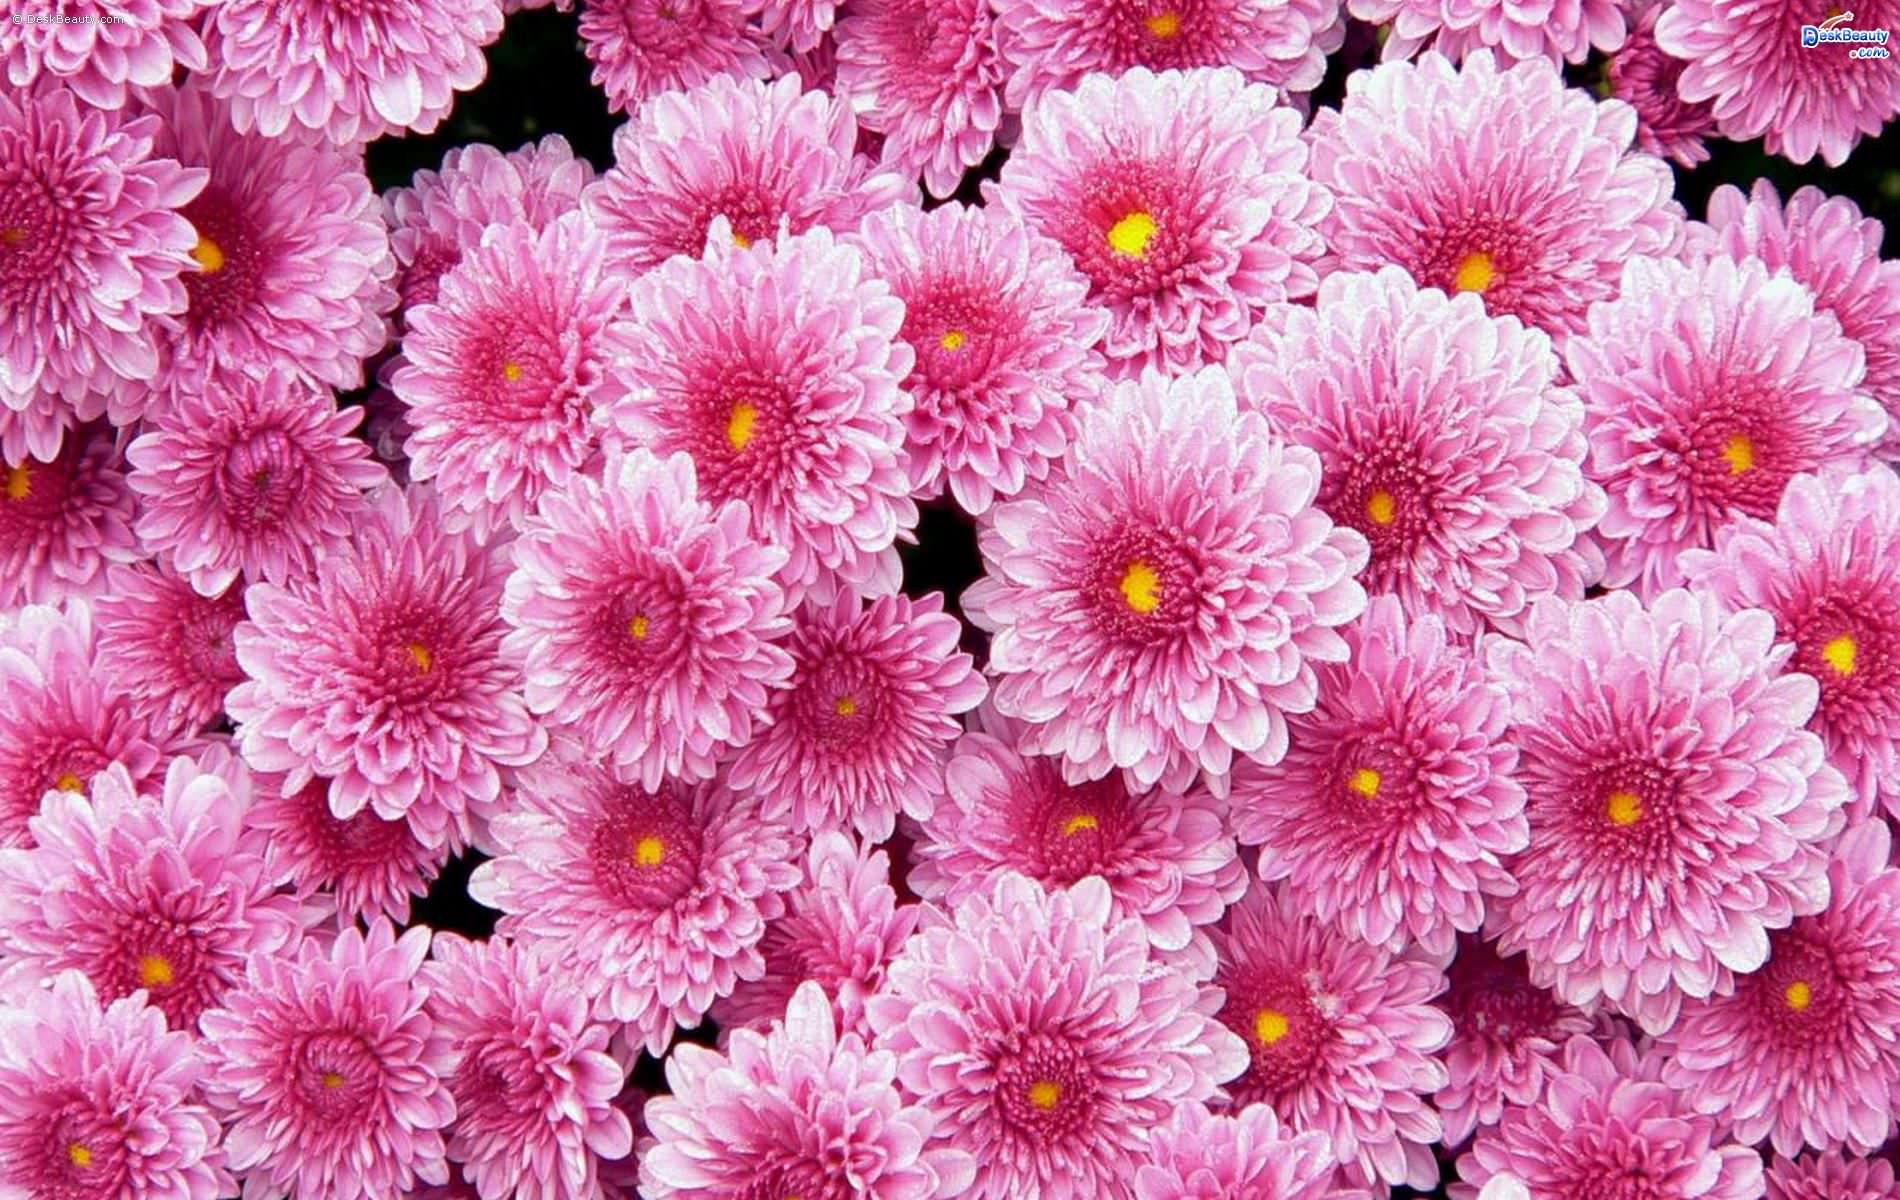 166+ Flower Backgrounds, Wallpapers, Pictures, Images | Design Trends